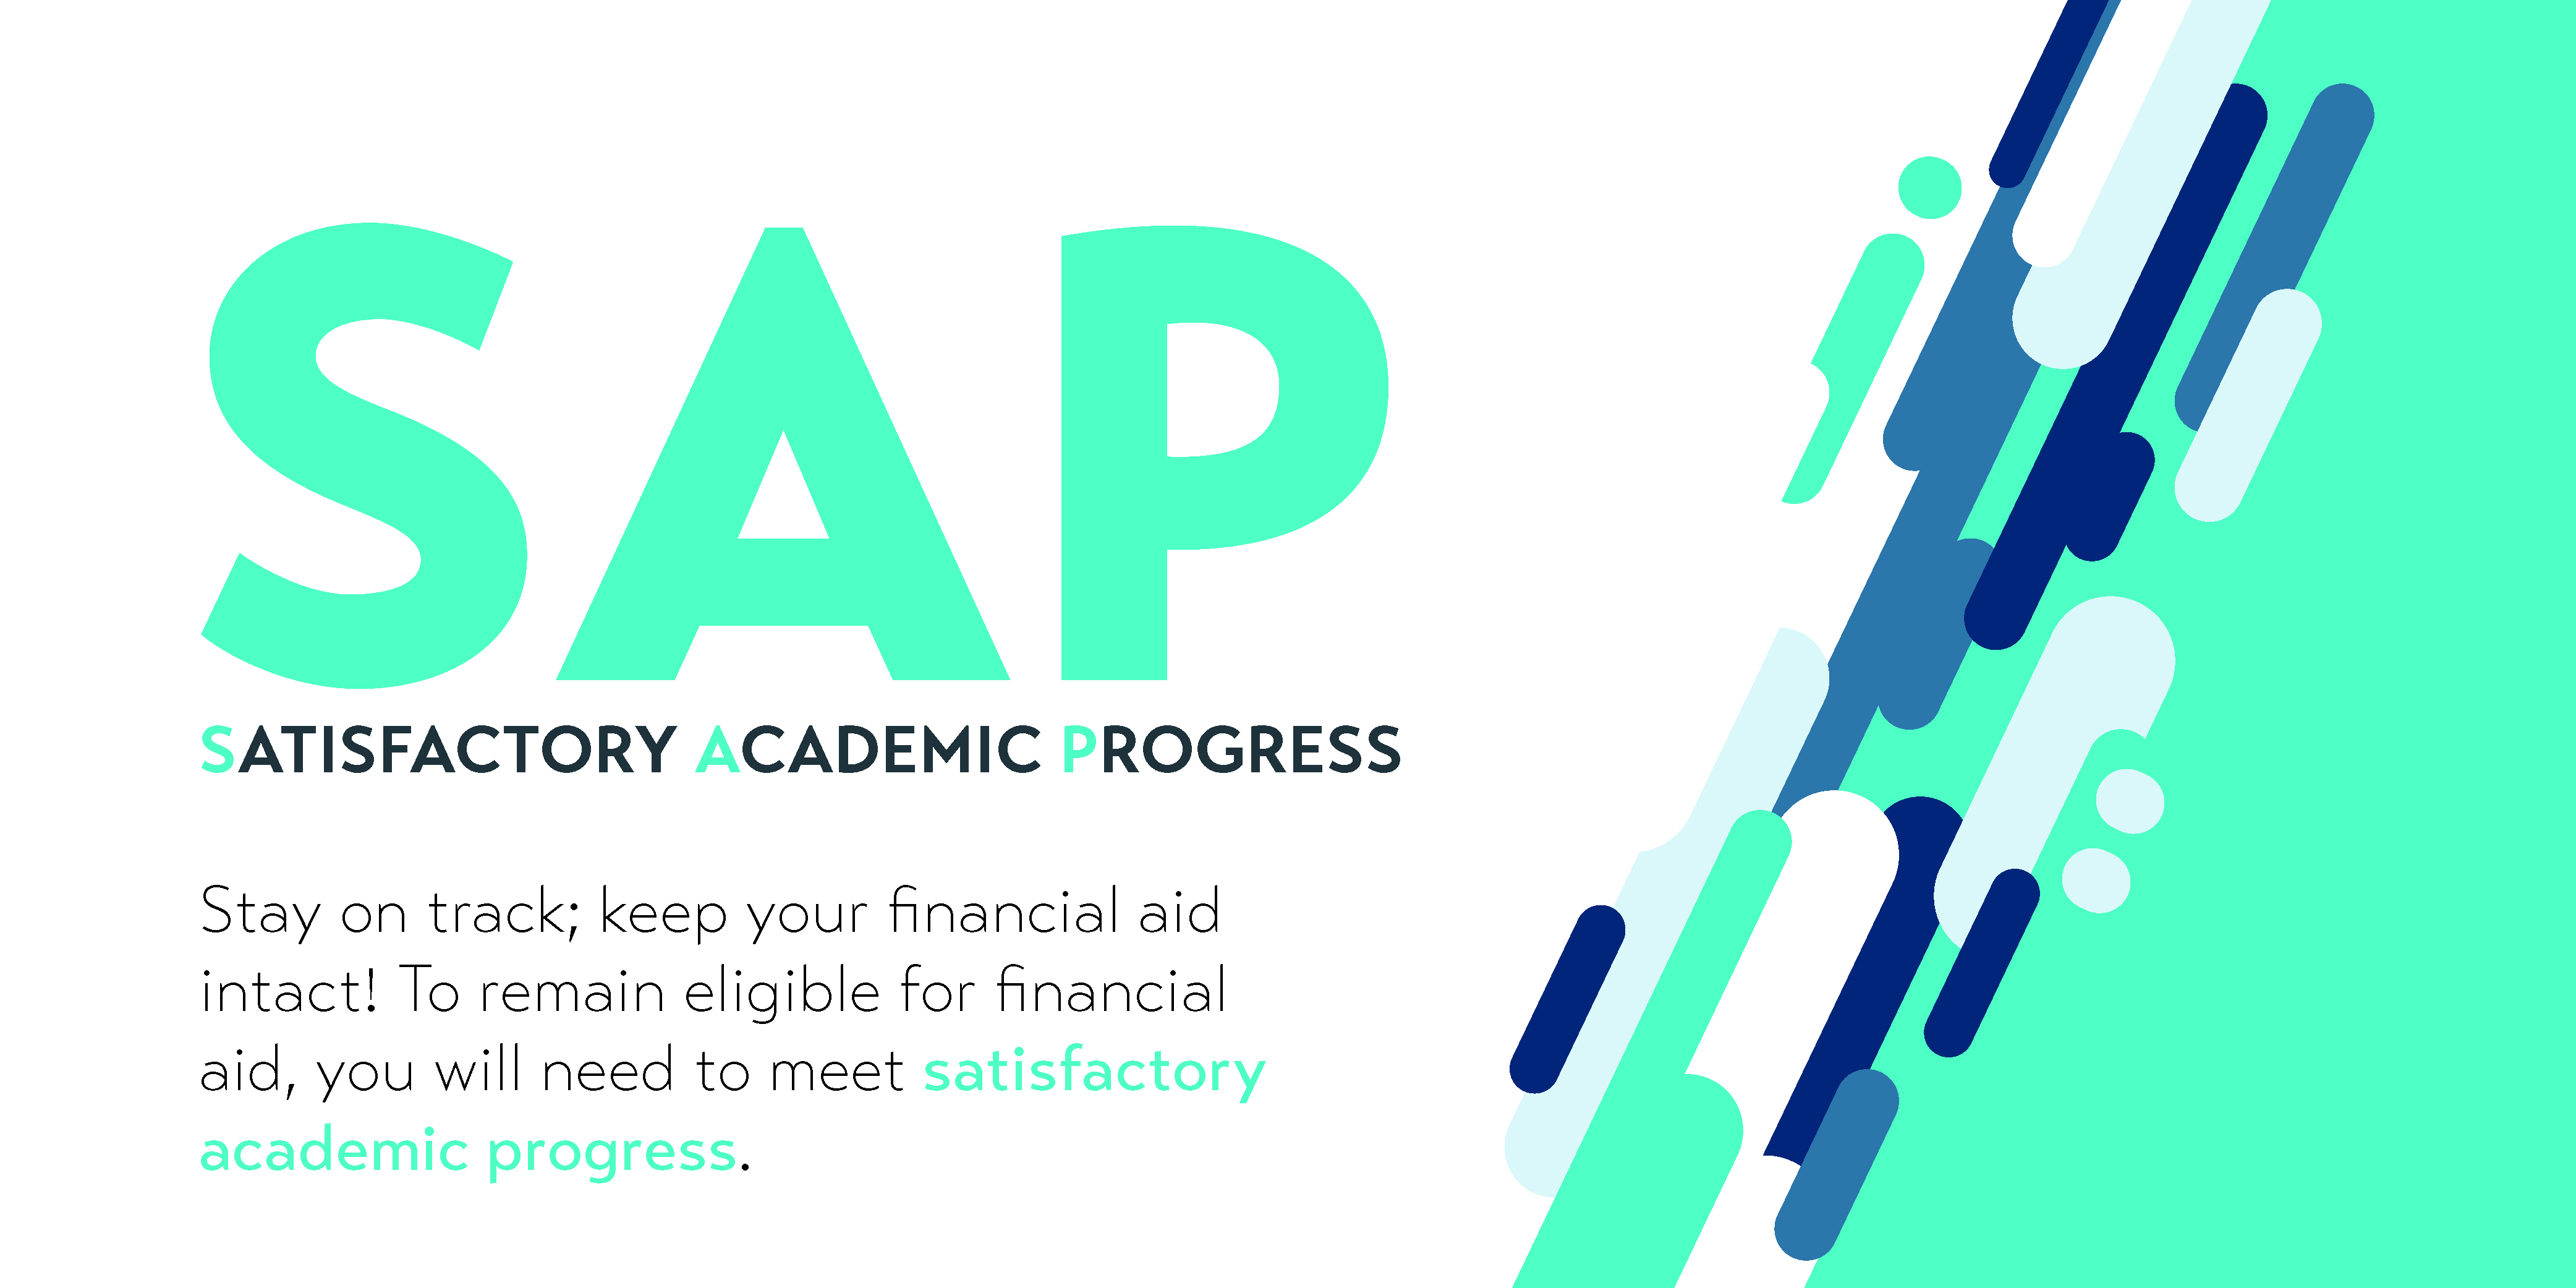 Satisfactory Academic Progress. Ensure your financial aid by completing 67% of your classes.